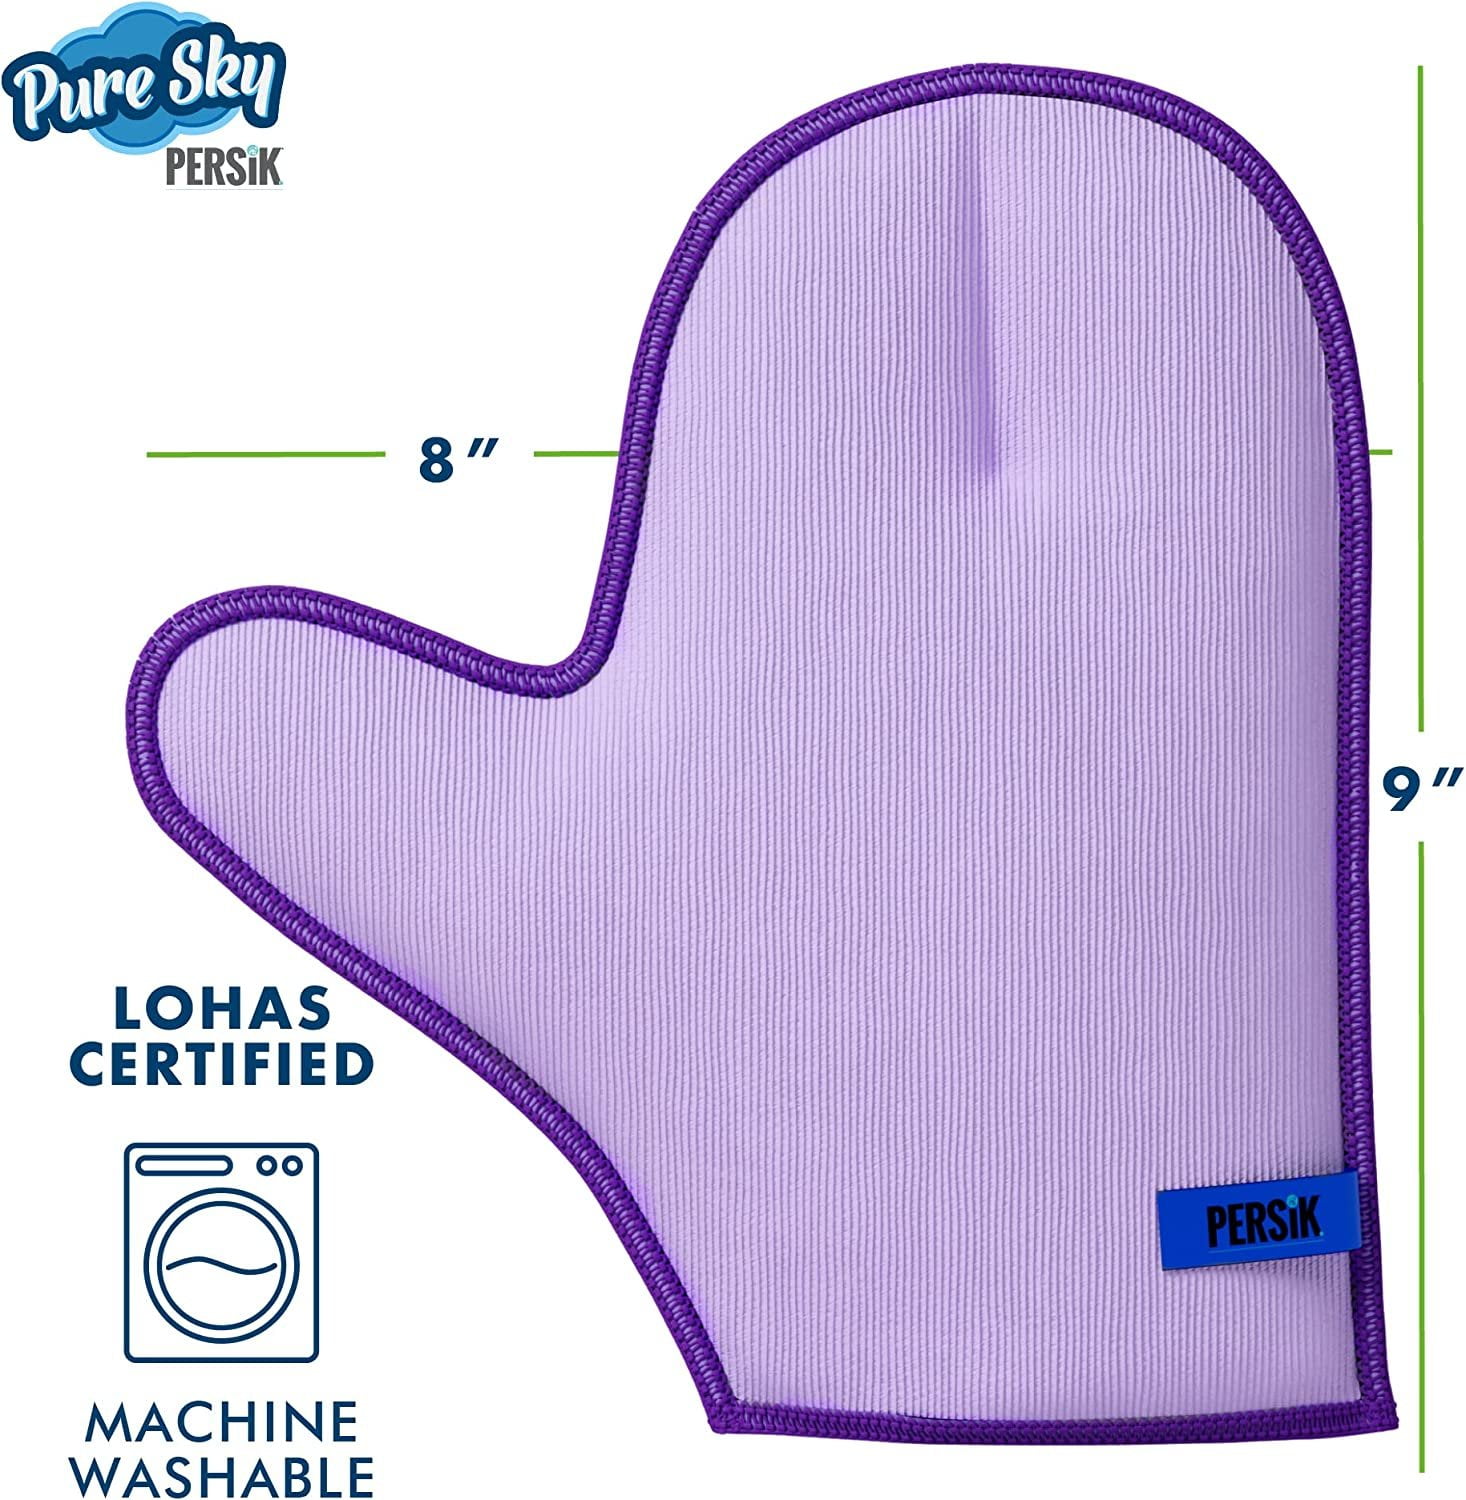 ADD Glove/MITT Sponge - Cleaning Pure-Sky - and + Window Cloth Detergents Towel + Water Includes Free Cleaning Streak Glass and Dusting Ultra-Microfiber Needed Kitchen No Cleaning JUST Cleaning